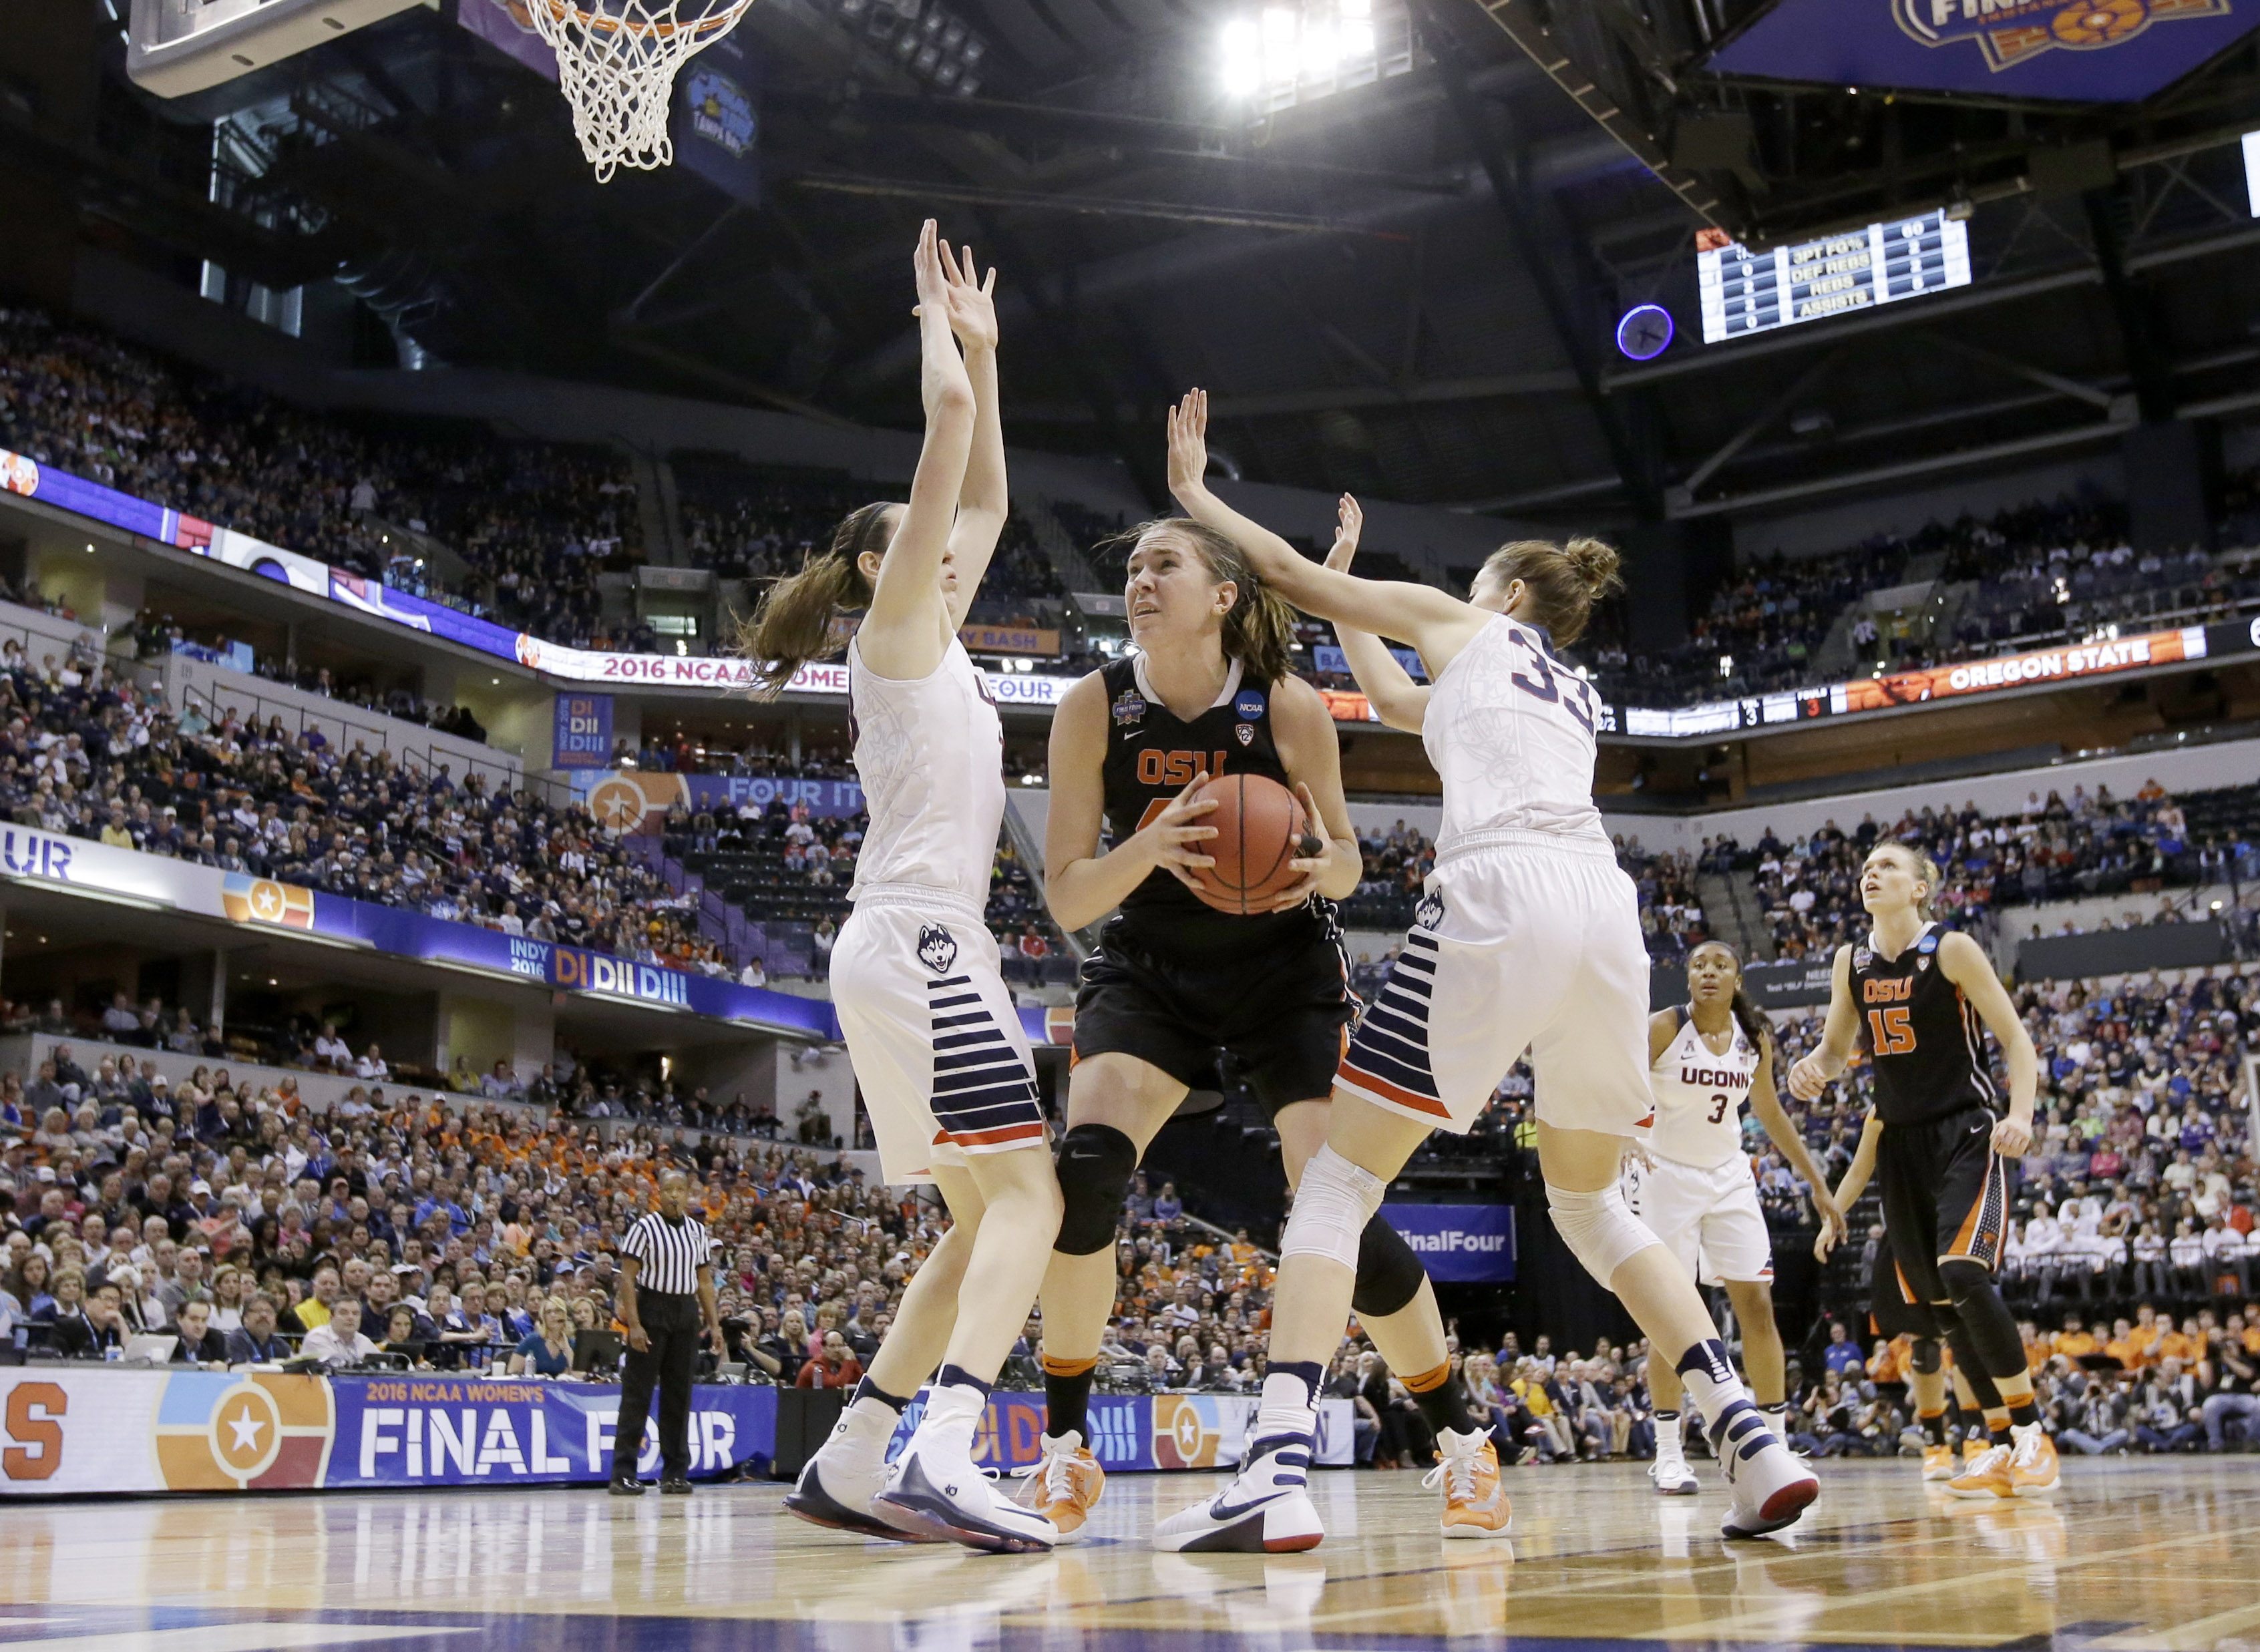 Oregon State's Ruth Hamblin (44) puts up a shot against Connecticut's Breanna Stewart (30) and Katie Lou Samuelson (33) during the first half of a national semifinal game at the women's Final Four in the NCAA college basketball tournament Sunday, April 3, 2016, in Indianapolis.